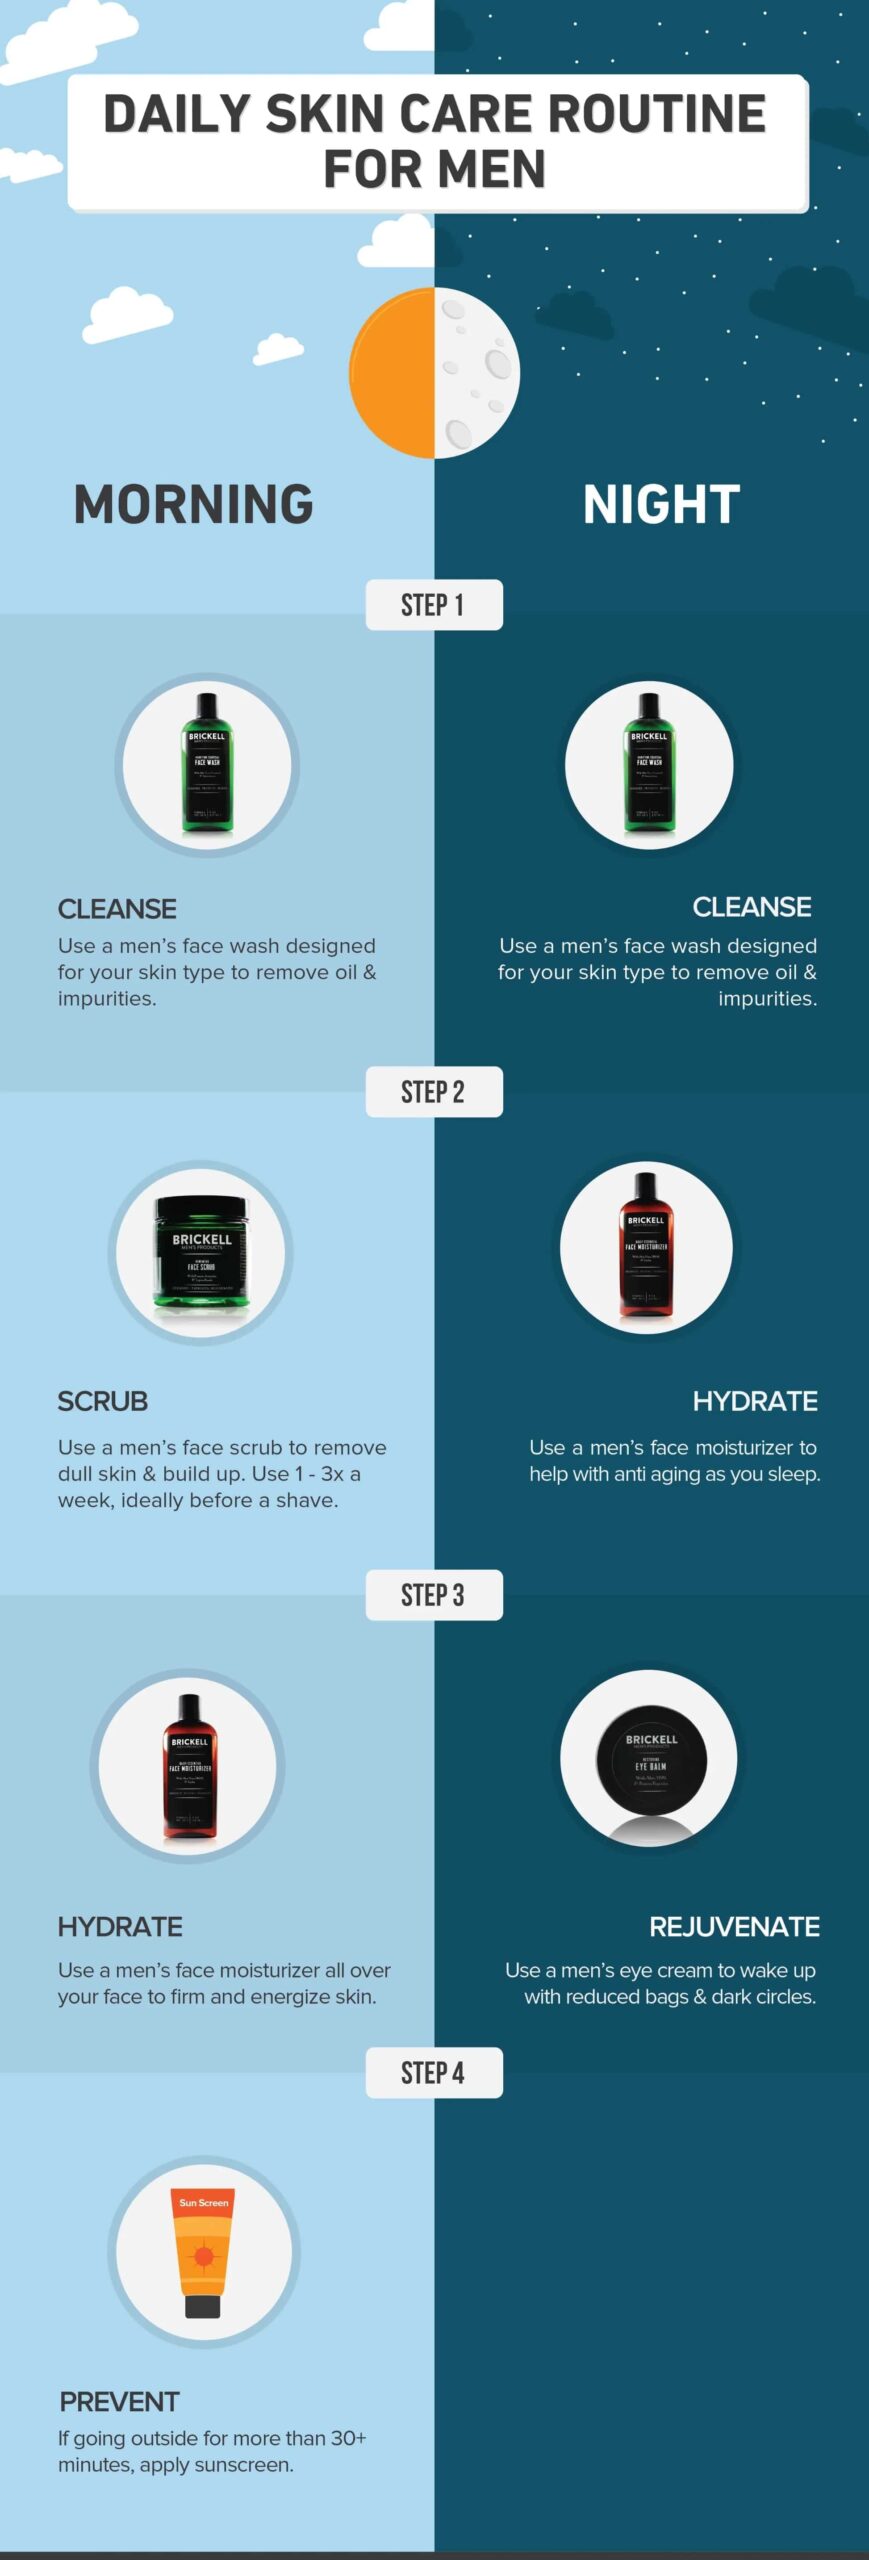 Daily Skin Care Routine For Men